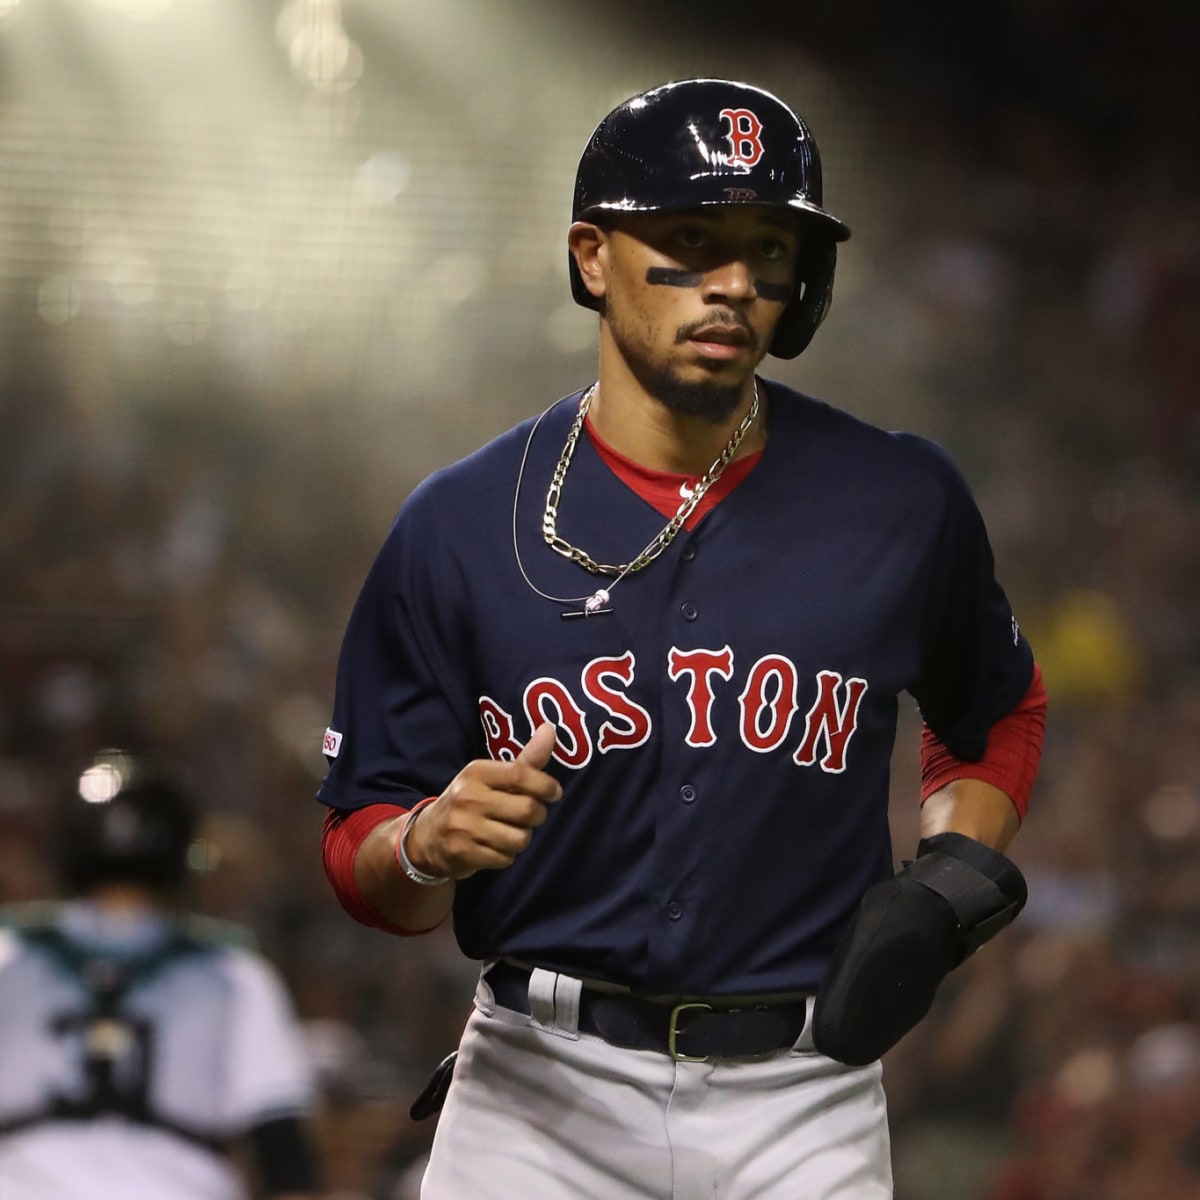 Red Sox agree to trade Mookie, Price to Dodgers, ESPN reports